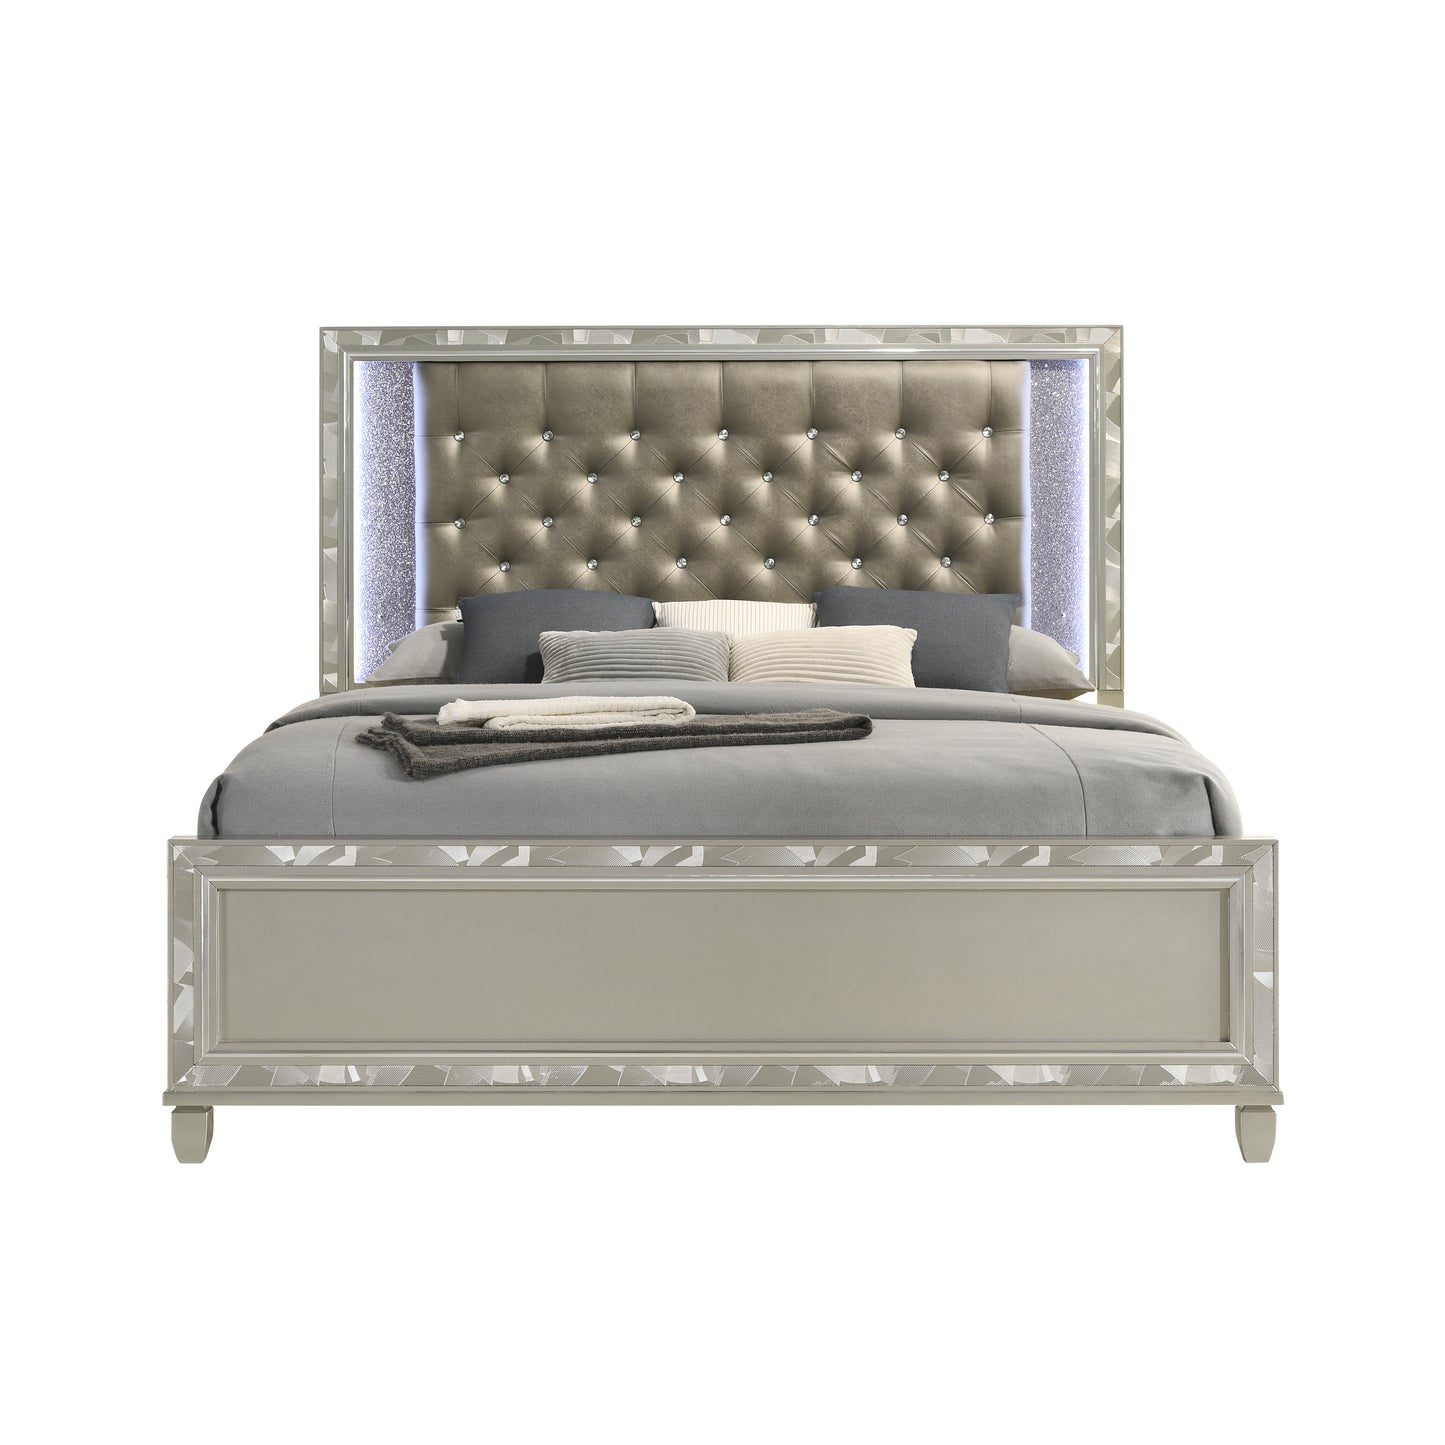 Radiance King Lighted Panel Bed